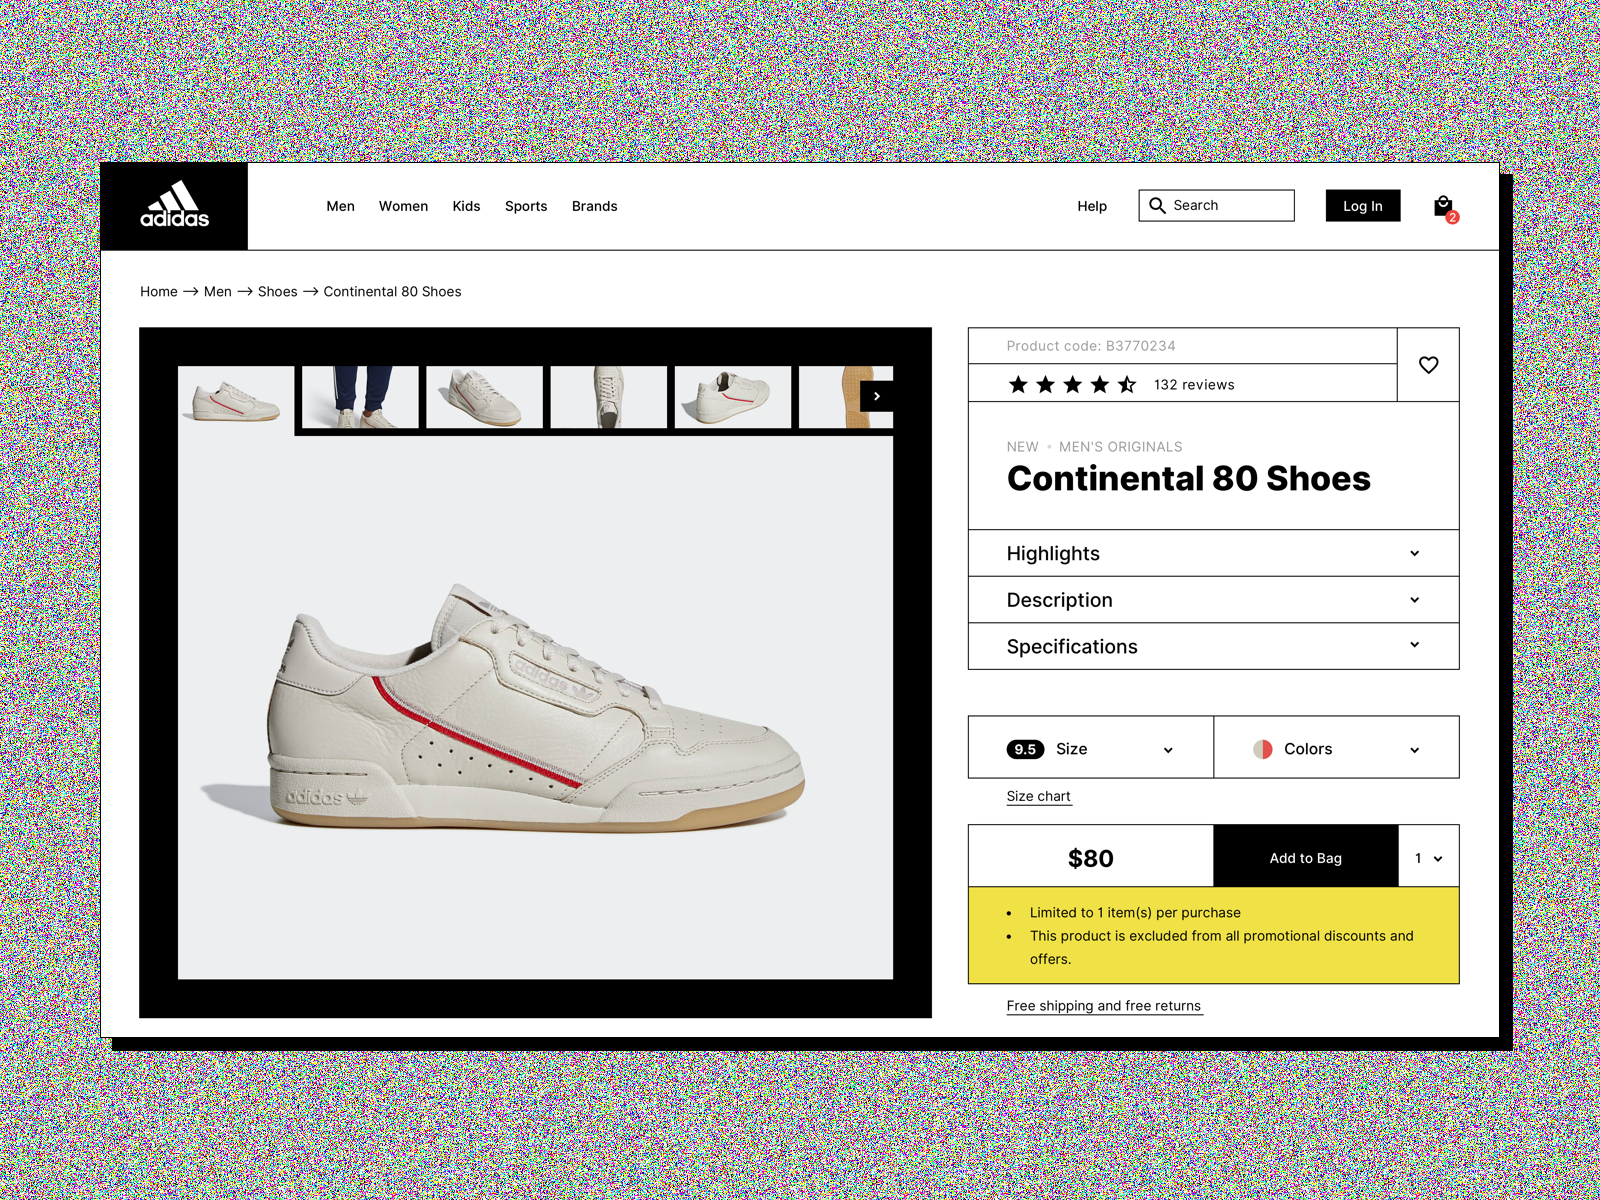 Adidas Online Store Redesign by Alexander Pyankov on Dribbble